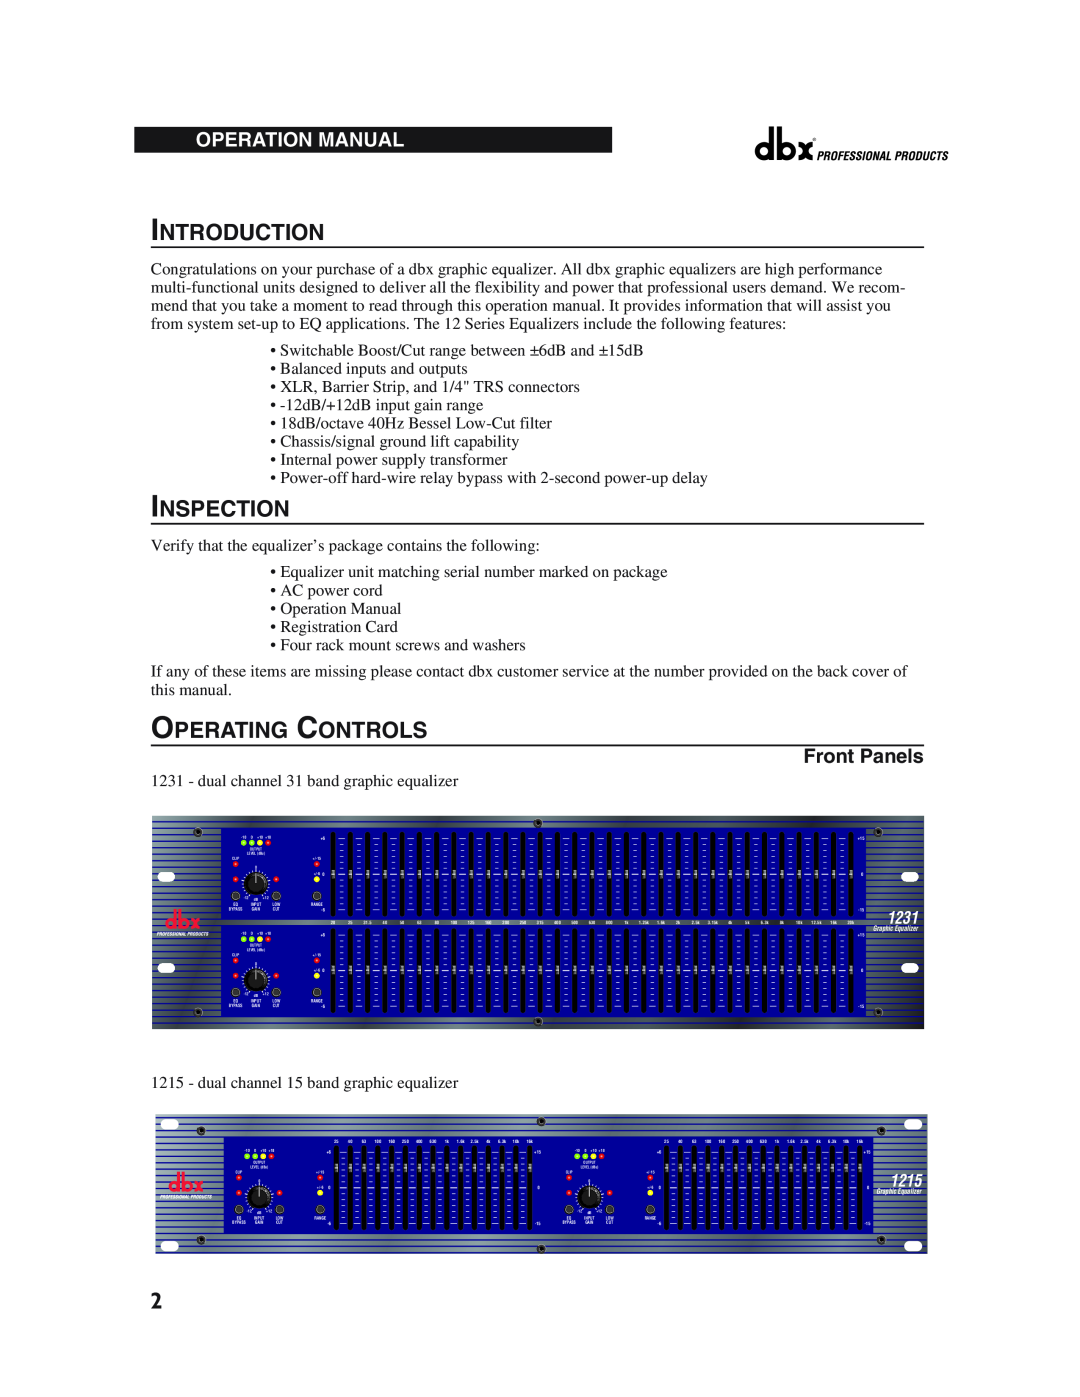 dbx Pro 12 Series operation manual Introduction, Inspection, Operating Controls, Front Panels, 1231, 1215 